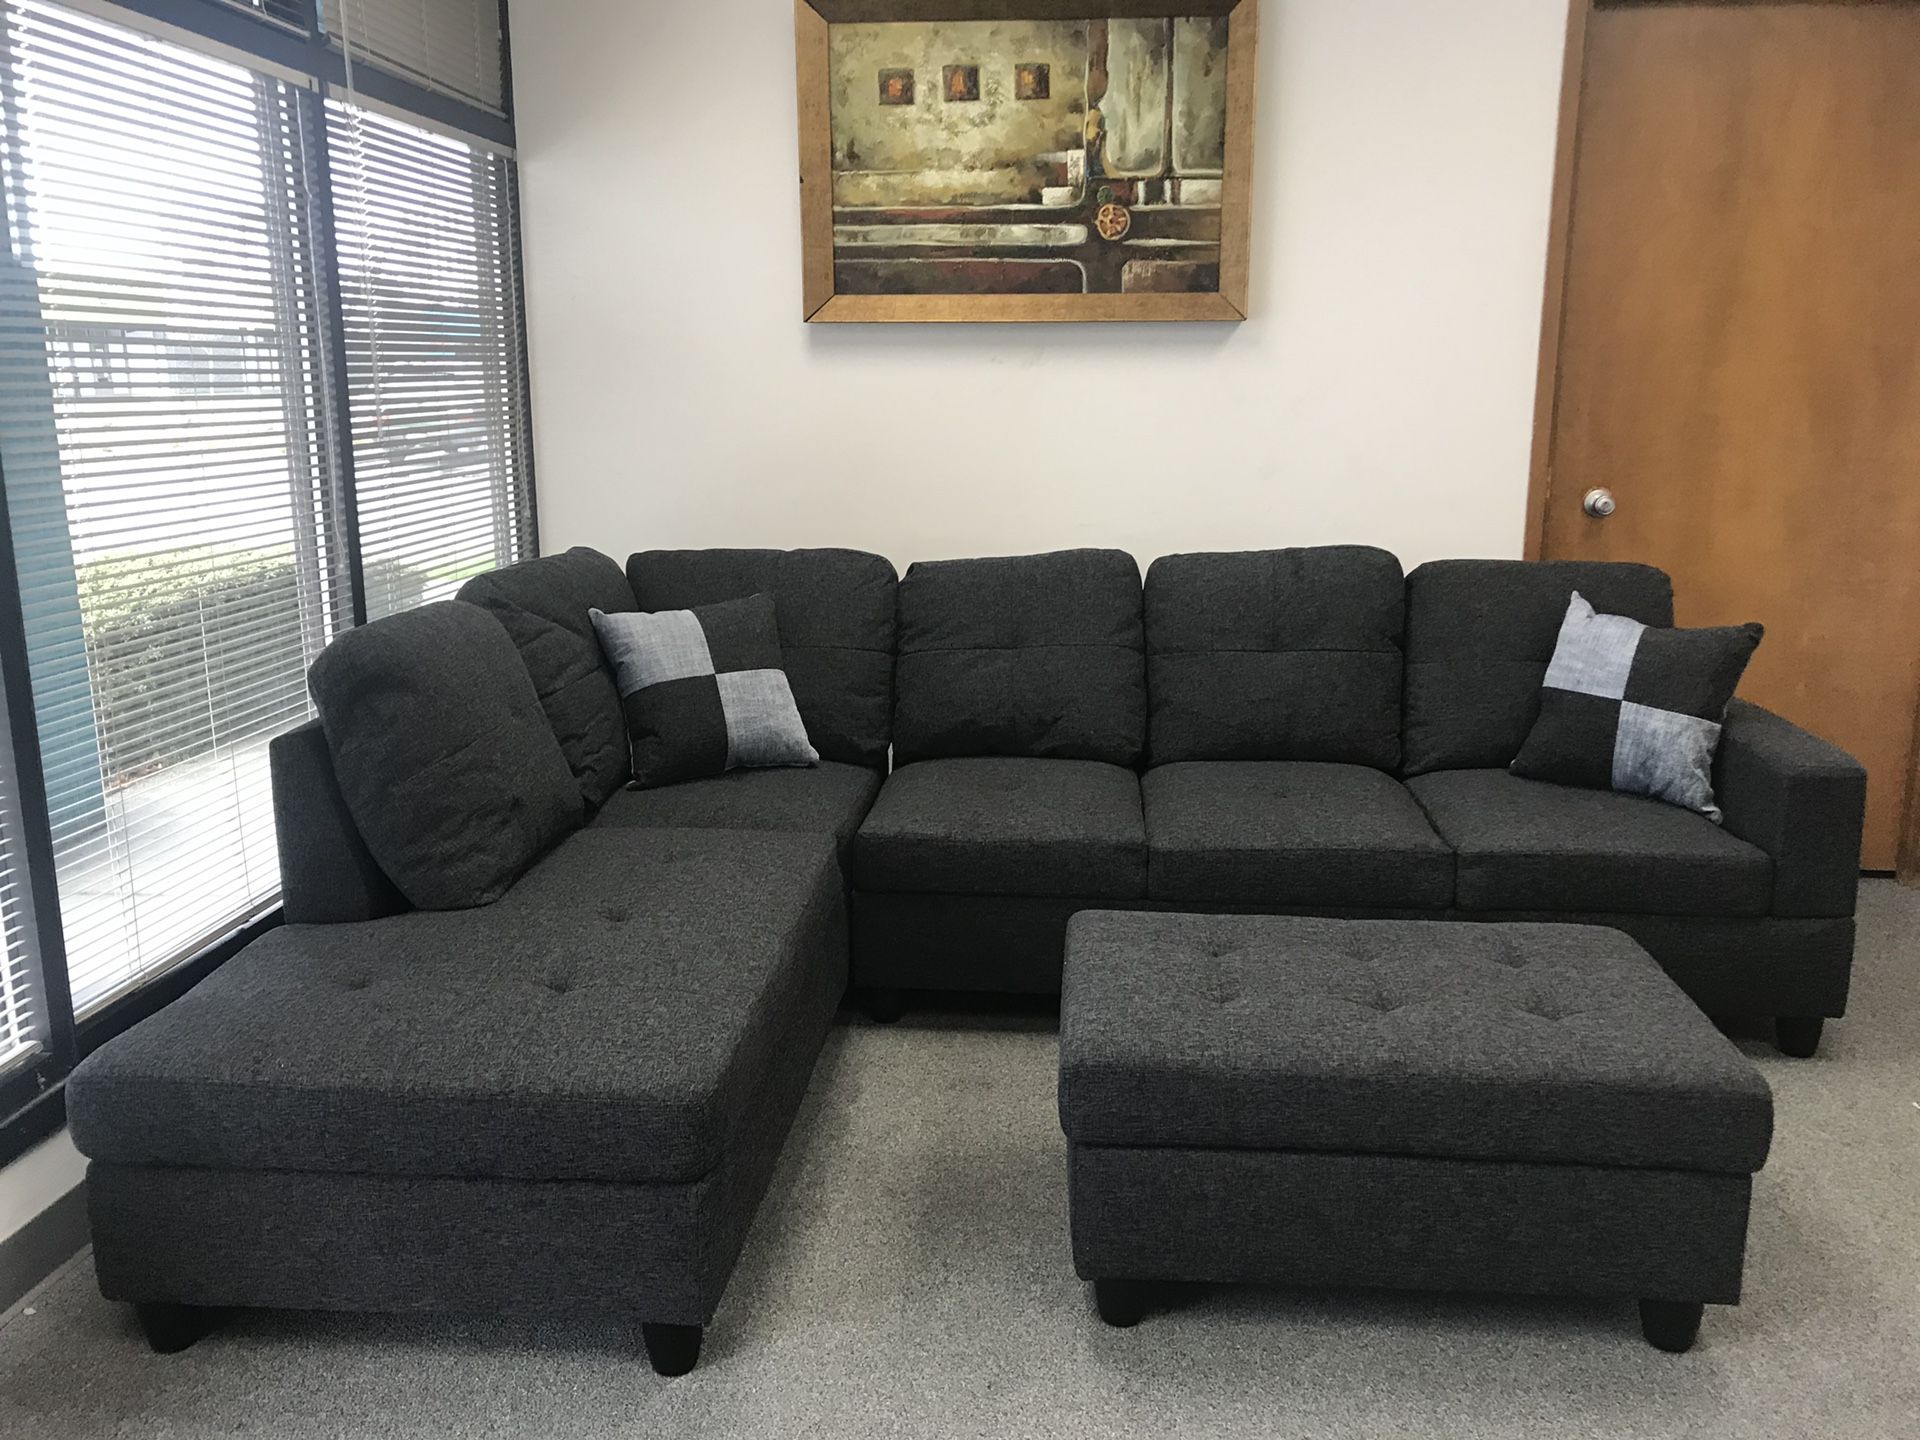 New Never Used ! Dark grey sectional couch set with storage ottoman!